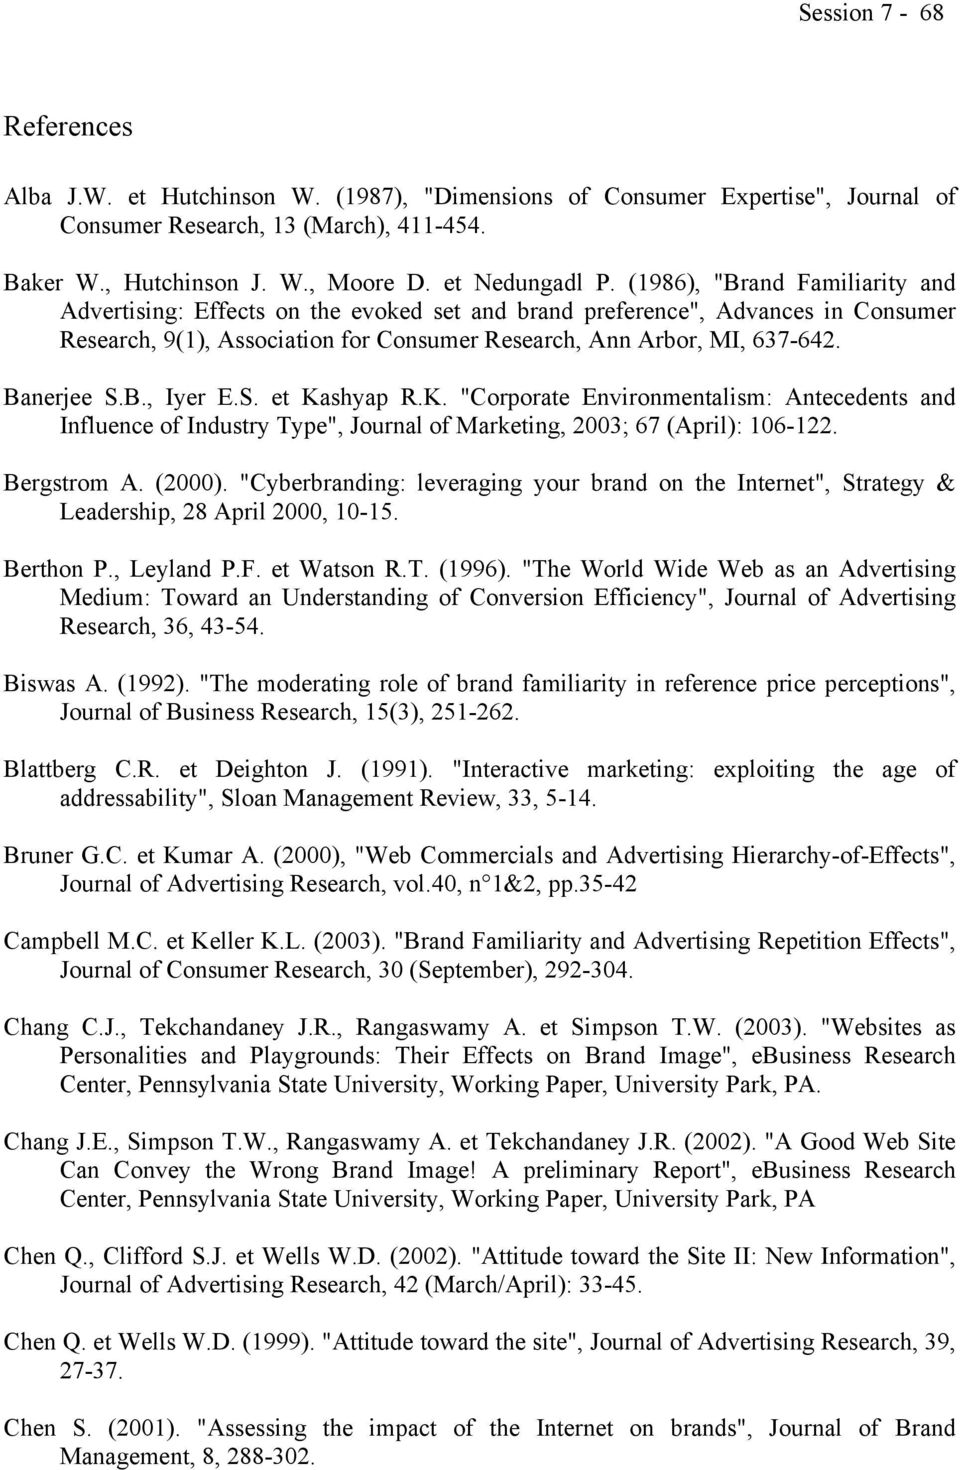 B., Iyer E.S. et Kashyap R.K. "Corporate Environmentalism: Antecedents and Influence of Industry Type", Journal of Marketing, 2003; 67 (April): 106-122. Bergstrom A. (2000).